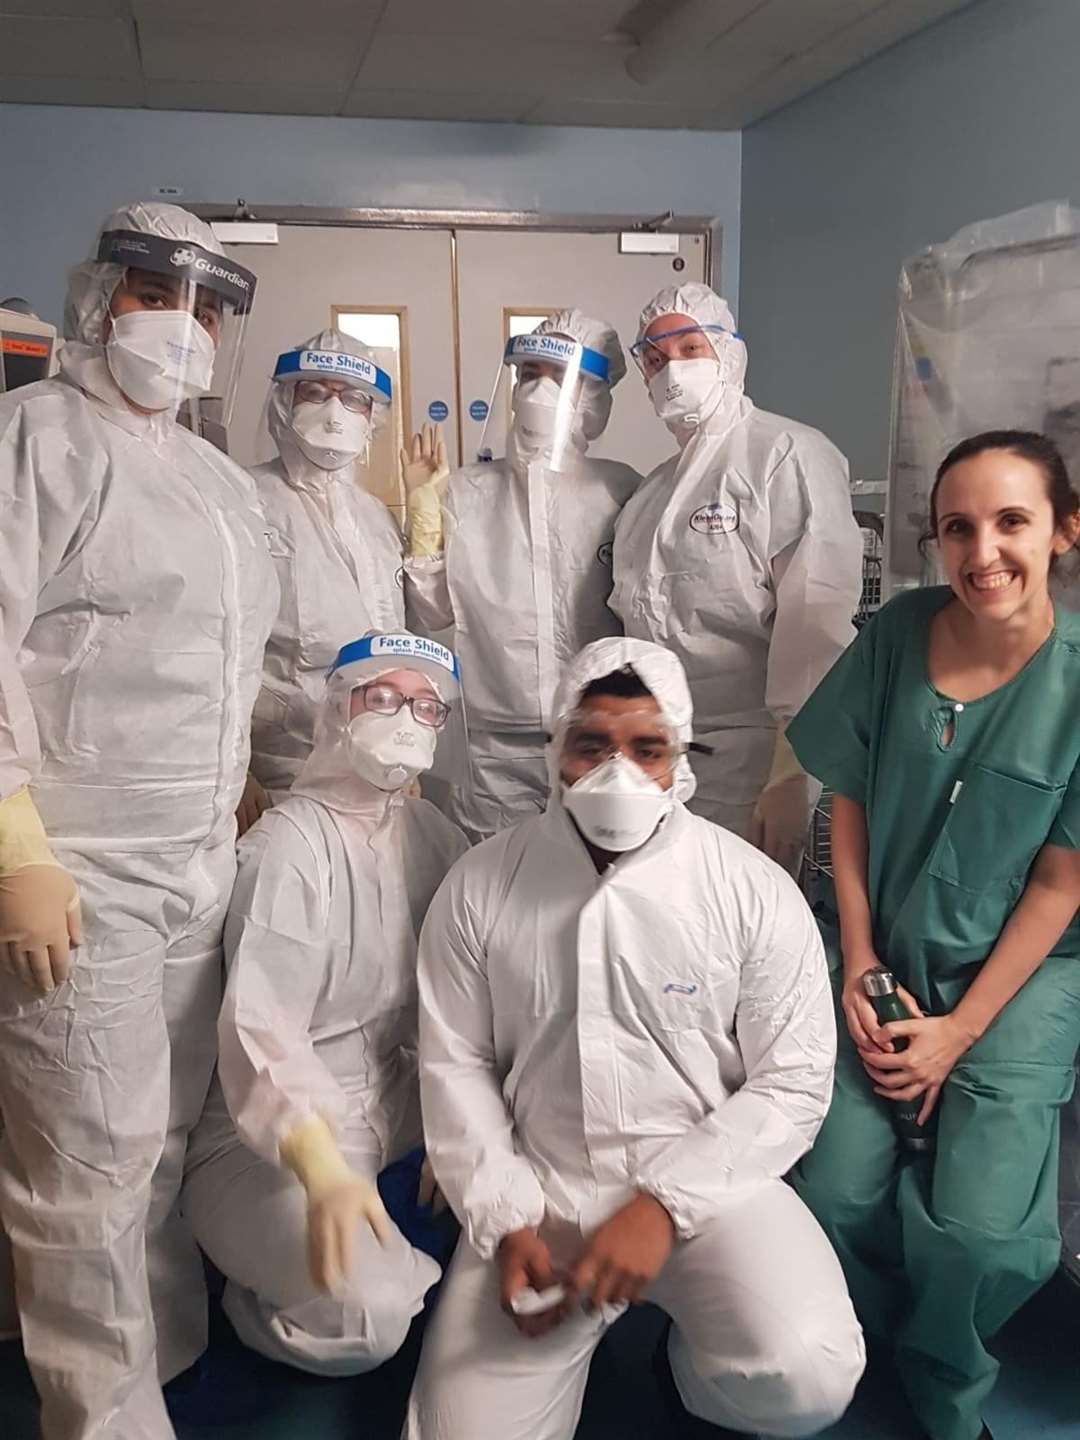 As NHS staff voiced concerns over delays in providing them with adequate PPE, these workers at Darent Valley Hospital were pleased with this equipment donated by a nearby resident.